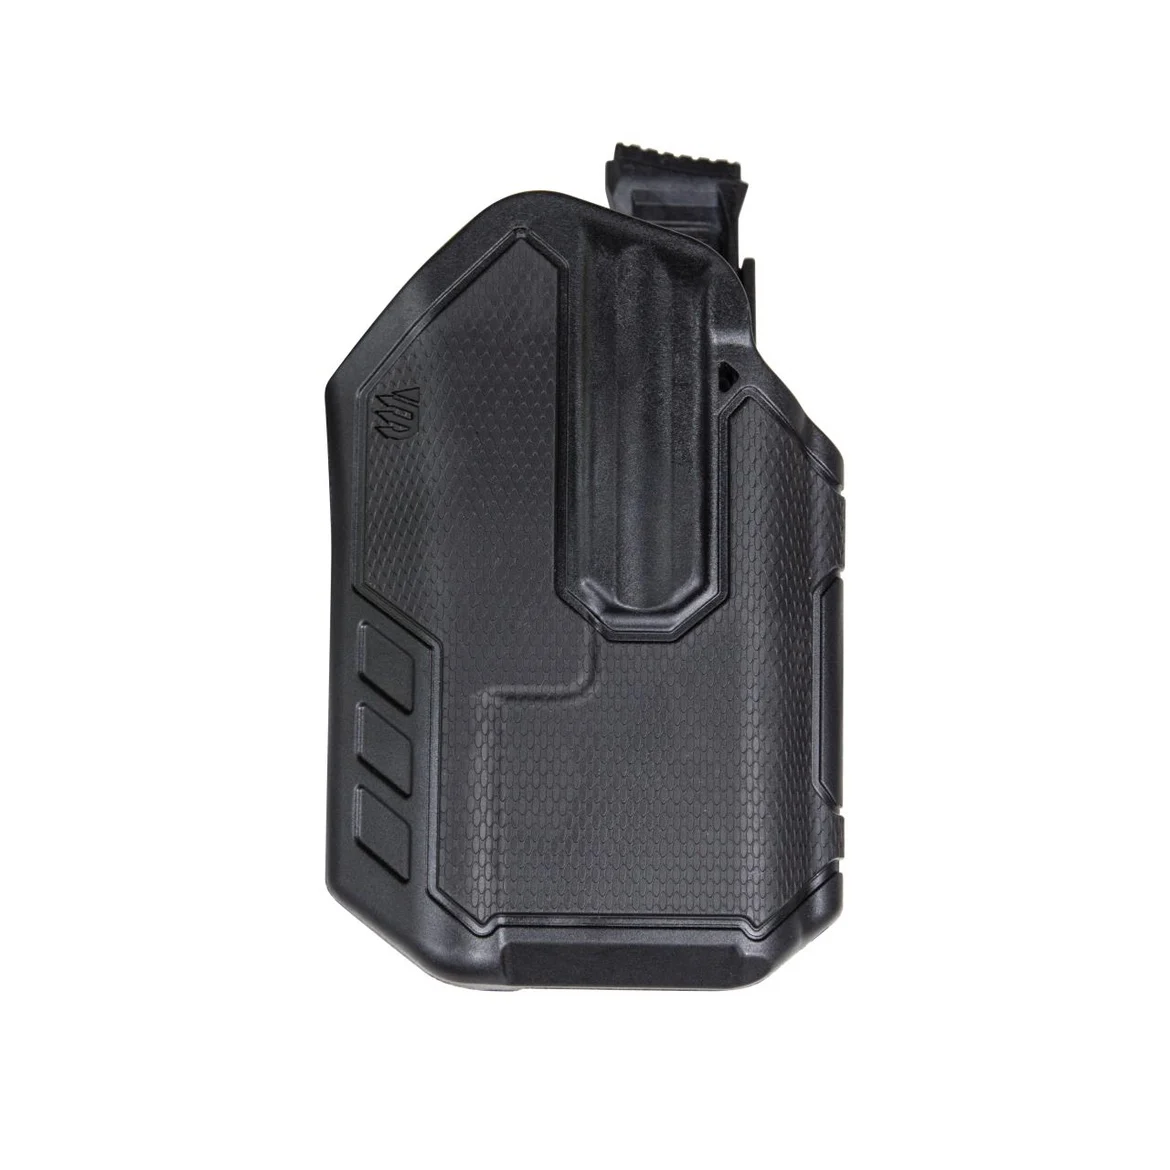 

GLOCK holster SIG universal quick release lamp cover TLR1 is suitable for G17 G19 G34 P320 P226